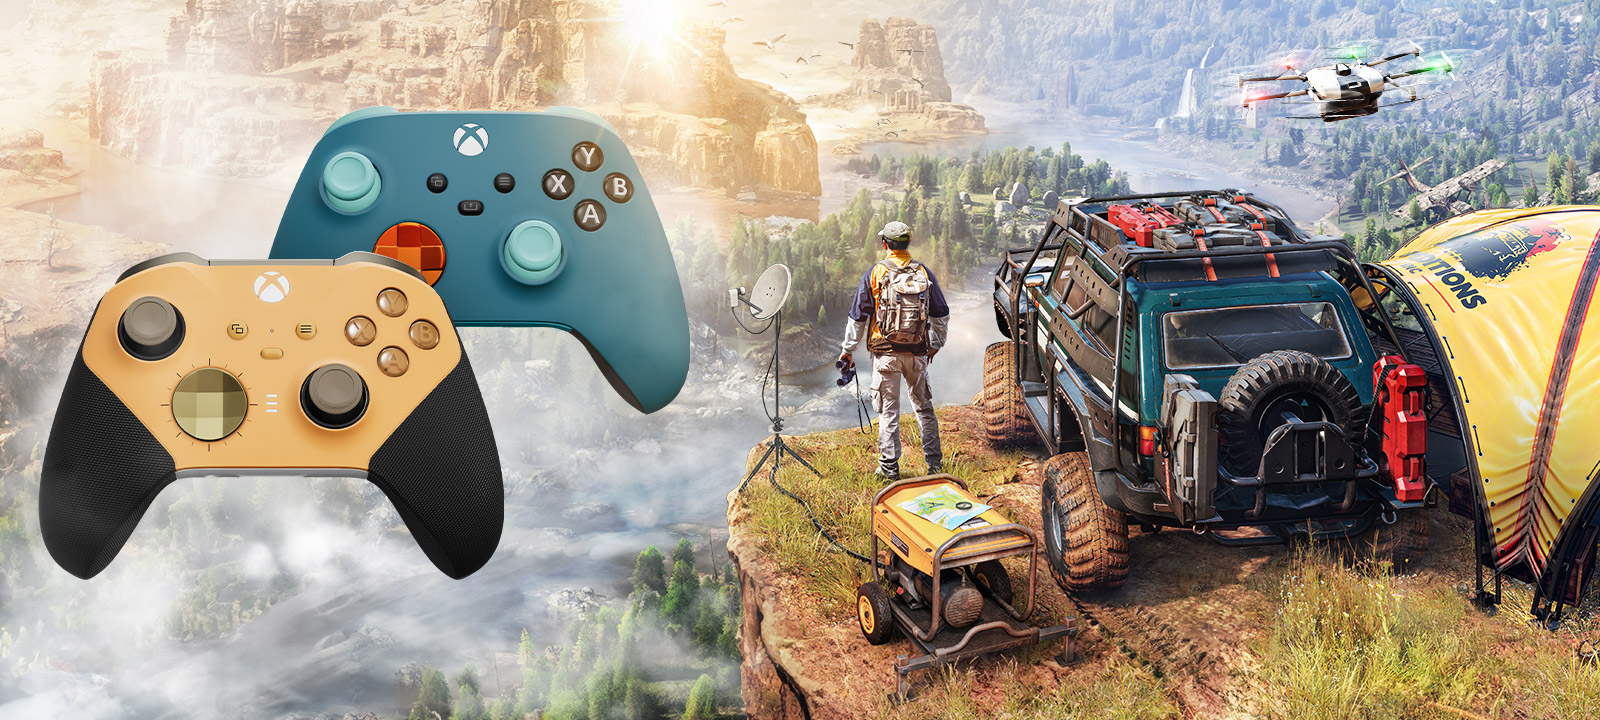 Expeditions: A Mudrunner game. An explorer looks out over a diverse landscape next to two controllers customised with Xbox Design Lab.